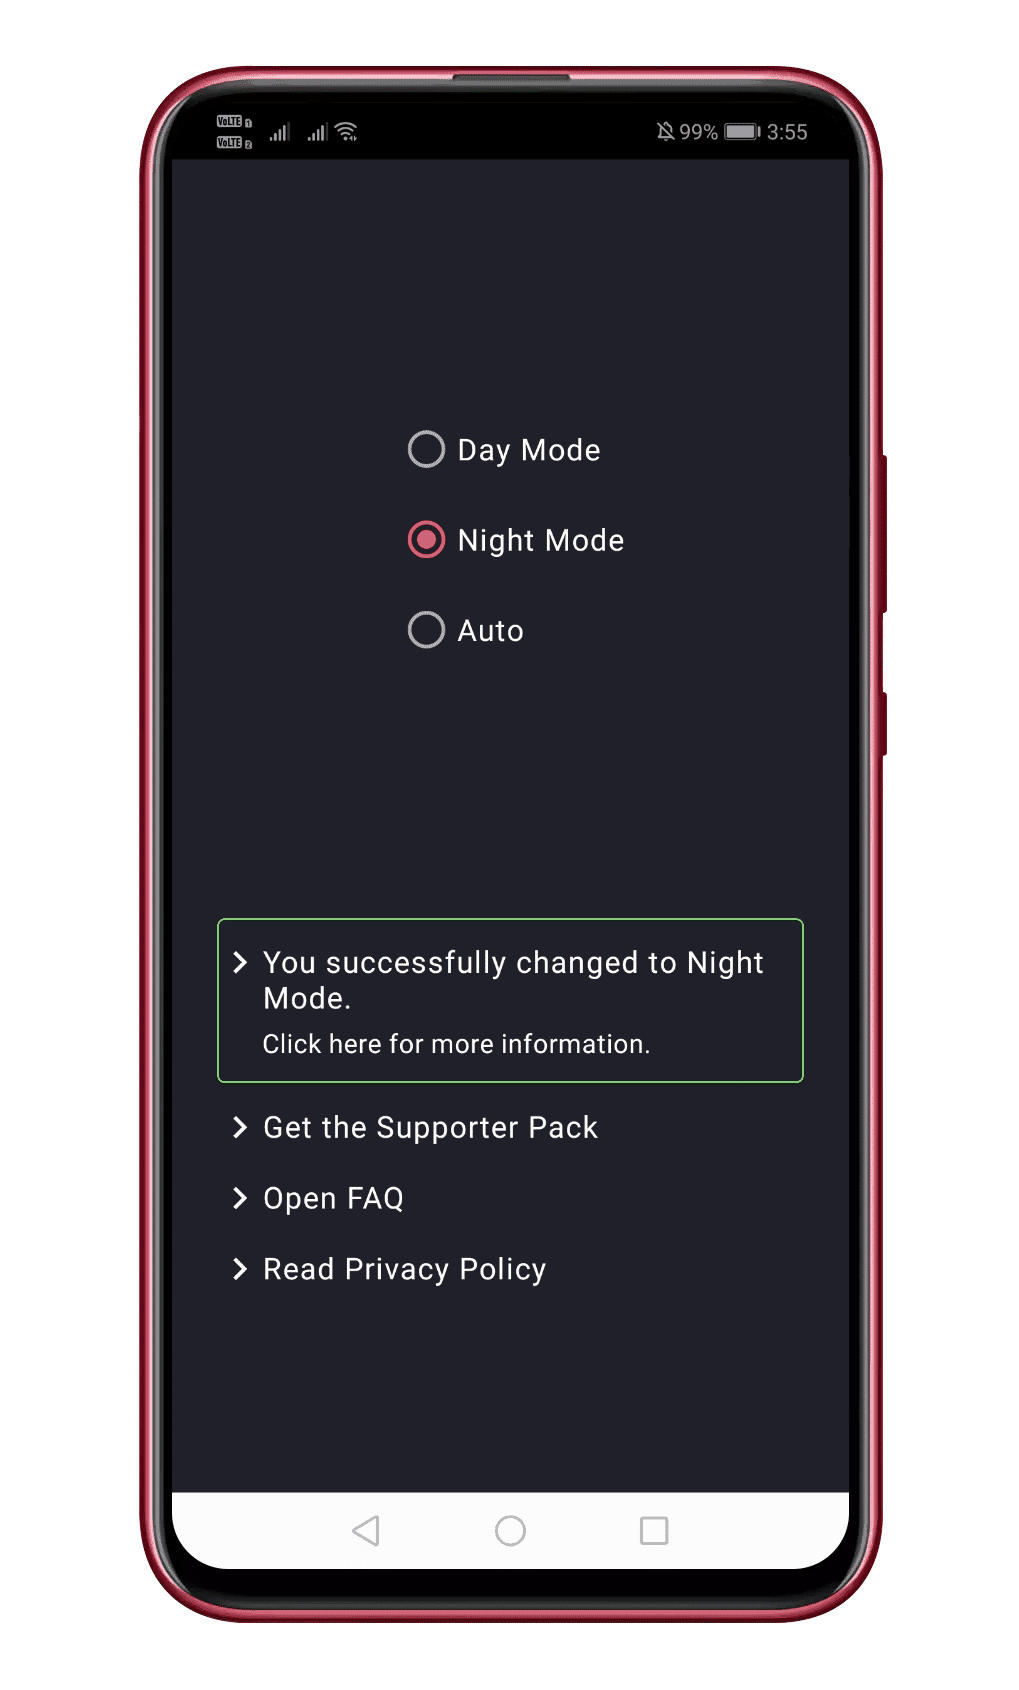 Select Night Mode from the options